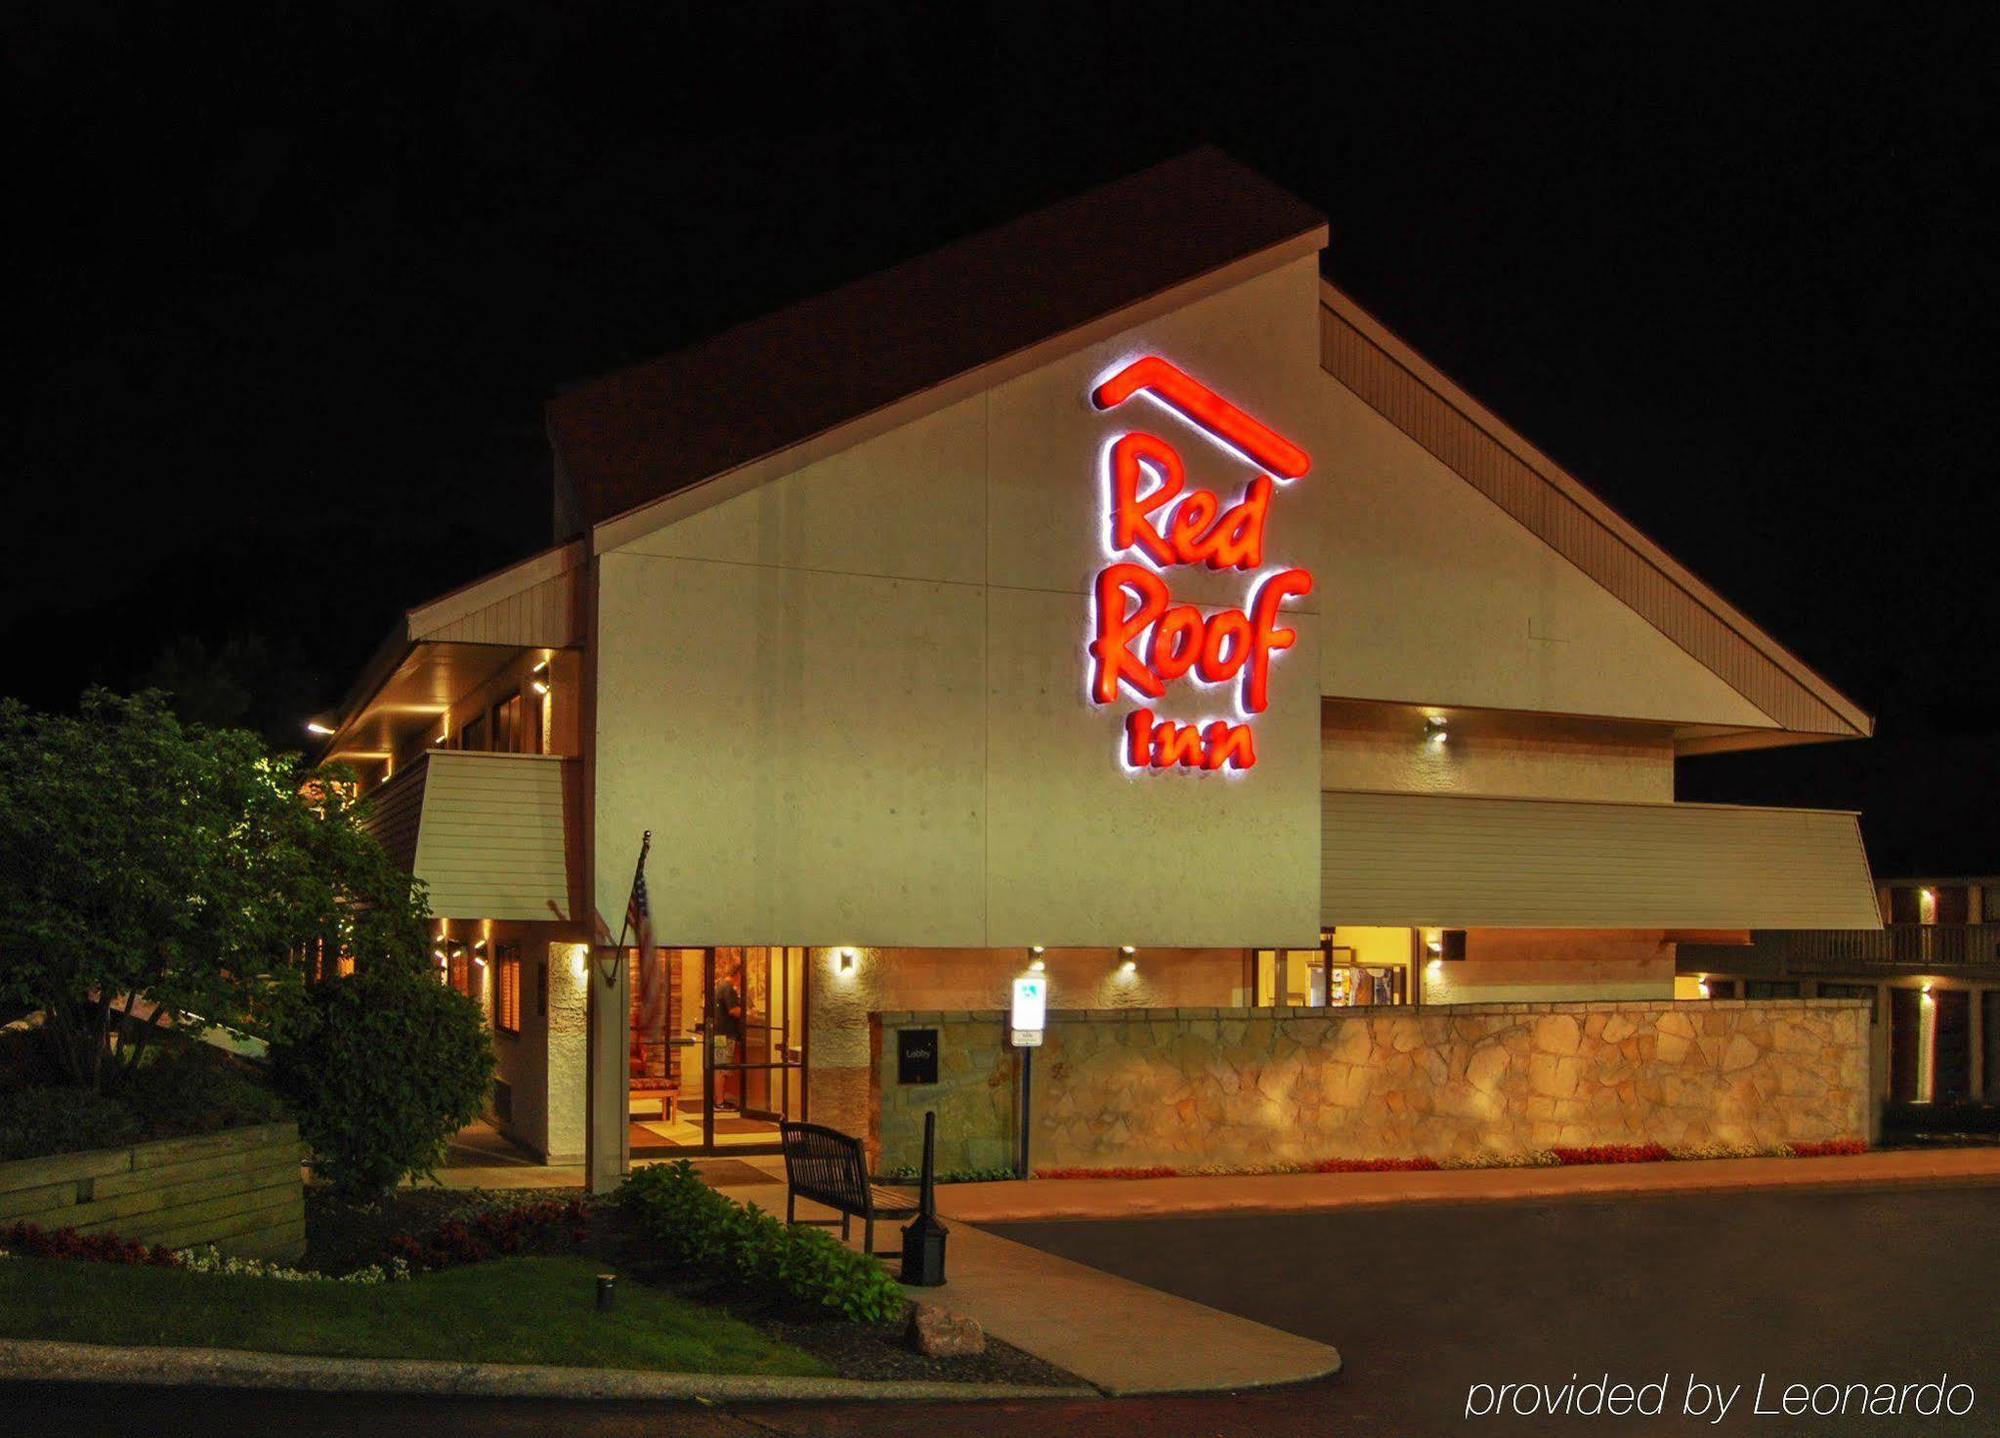 Red Roof Inn Cleveland - Mentor/ Willoughby Exterior photo